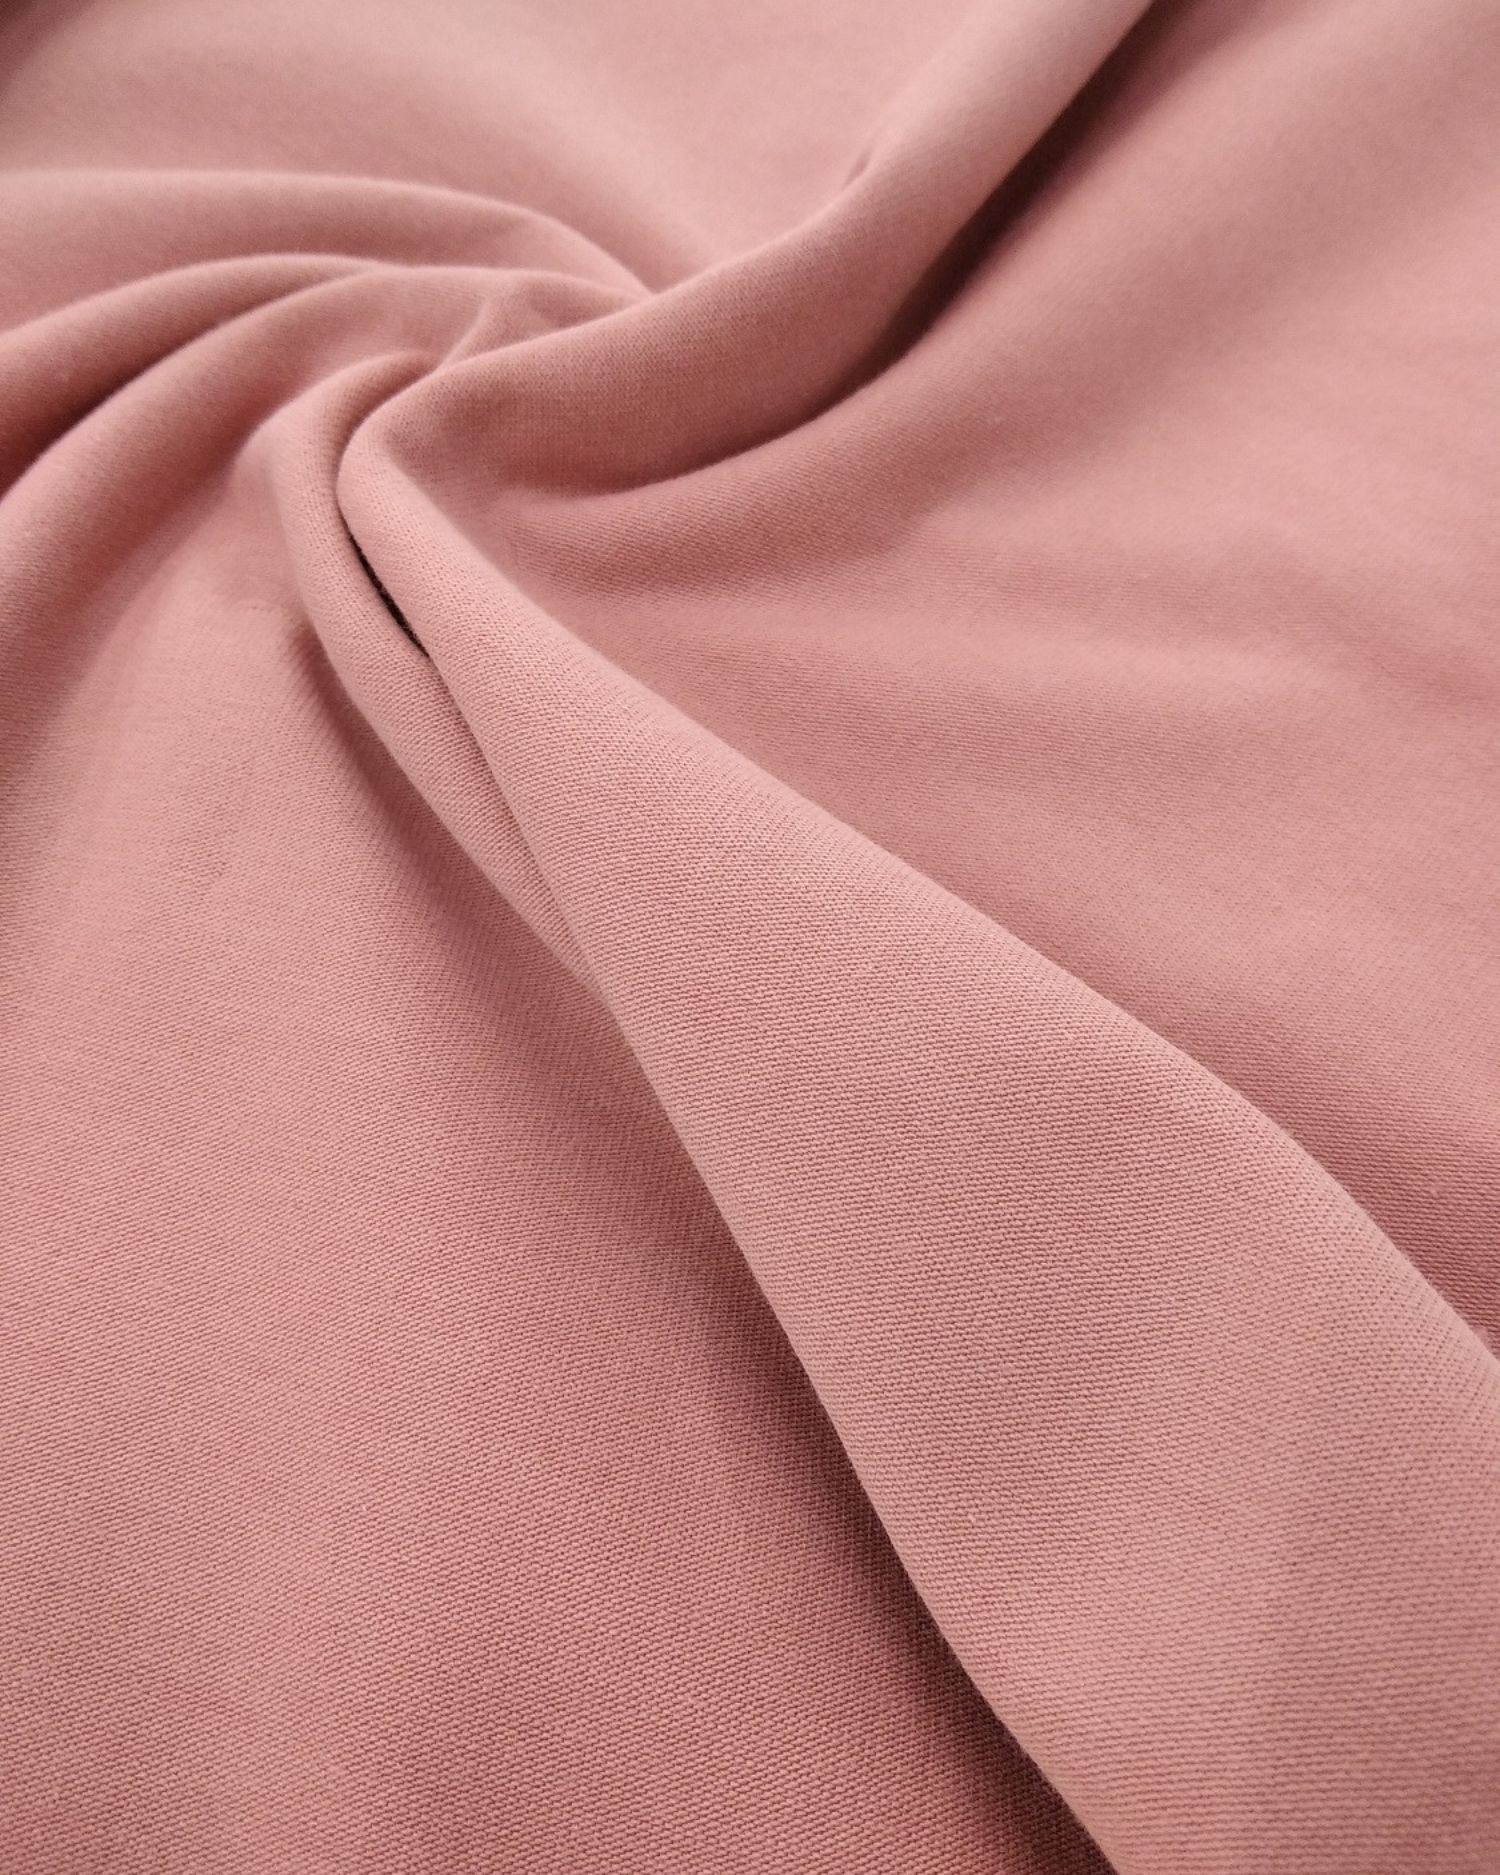 Cotton single Jersey with elastane, 1 meter, 185gr/m2, old rose